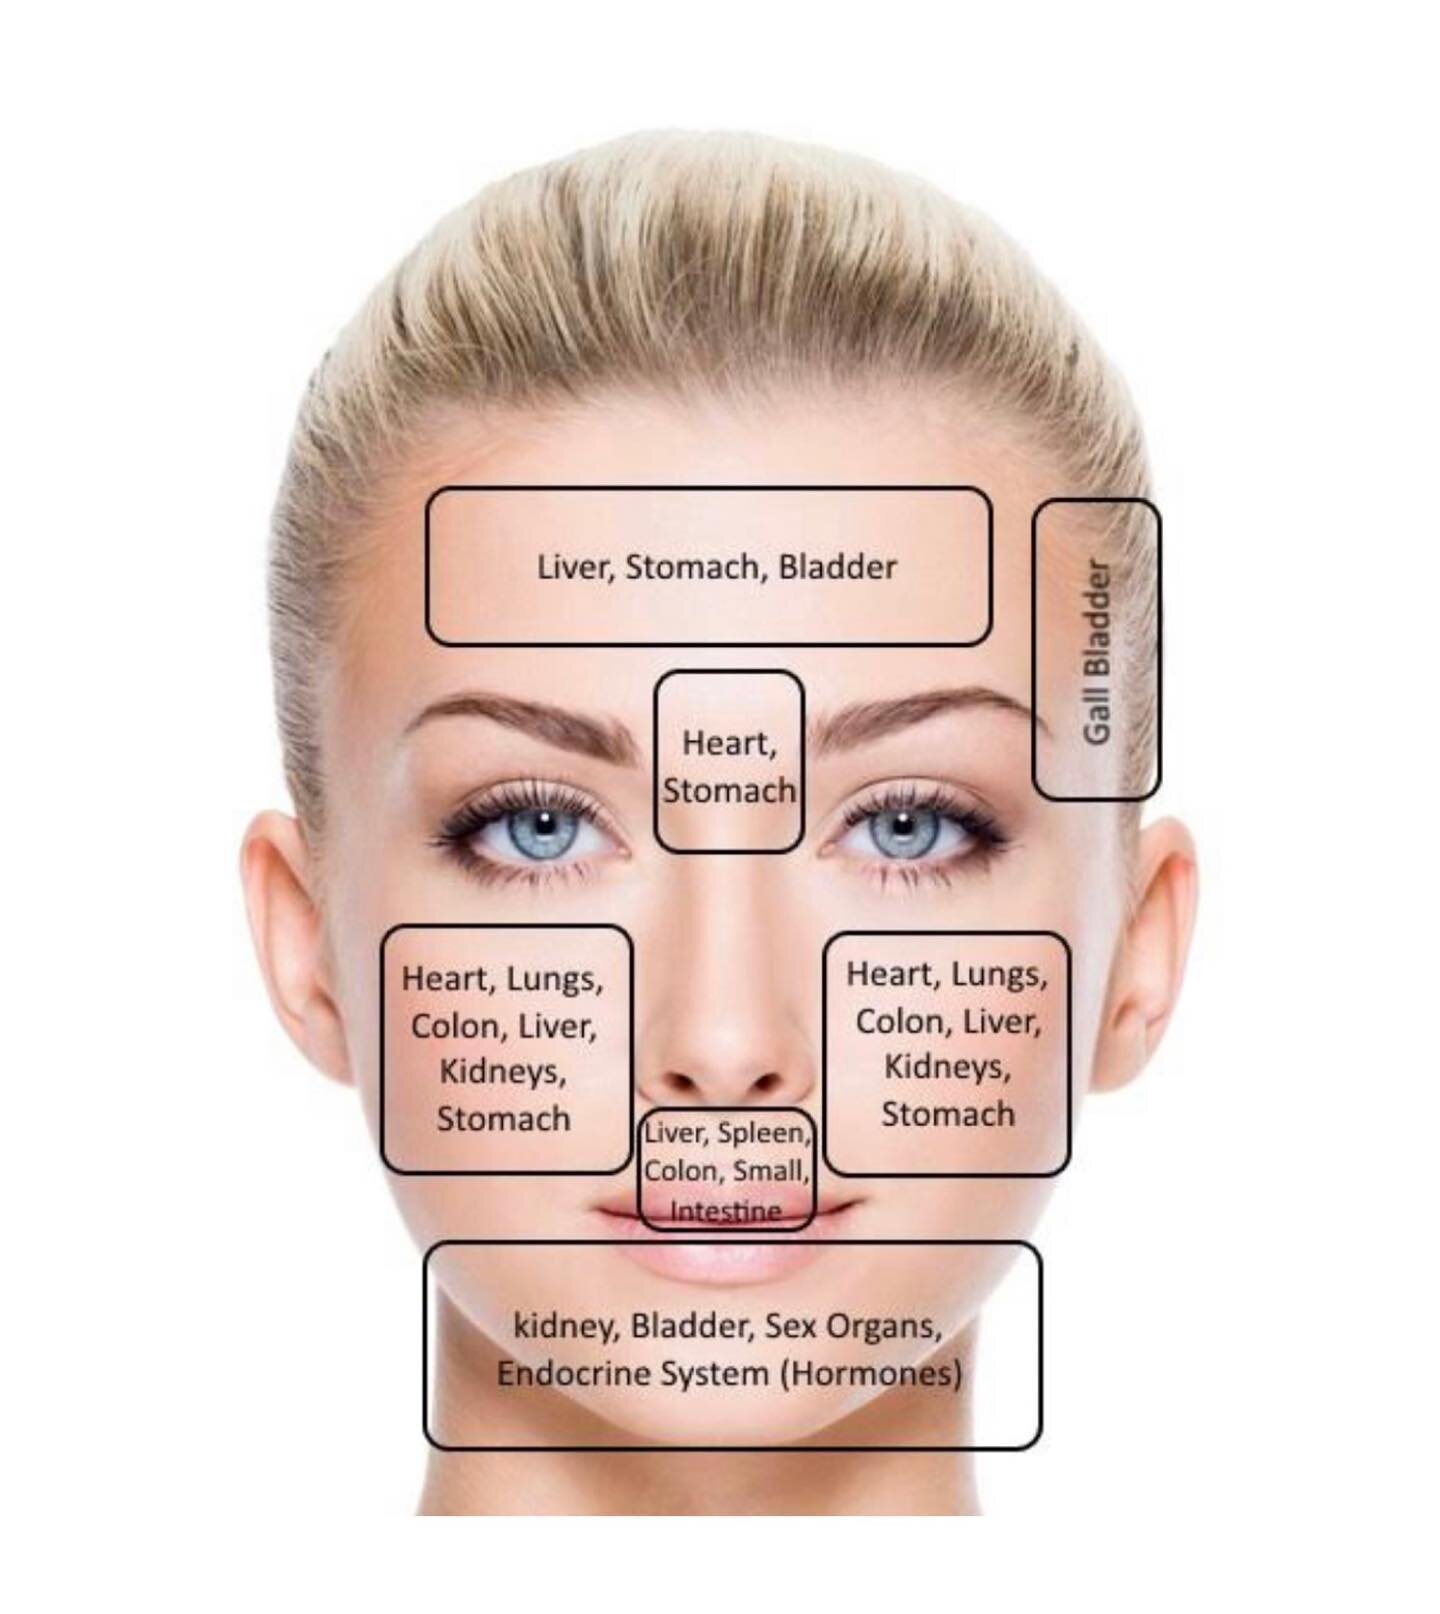 Acne is a complex skin condition &amp; reflects the processes inside our body.
The idea of the acne face map is rooted in this principle. Acne face mapping is followed in traditional Chinese medicine &amp; is based on the idea that internal factors m